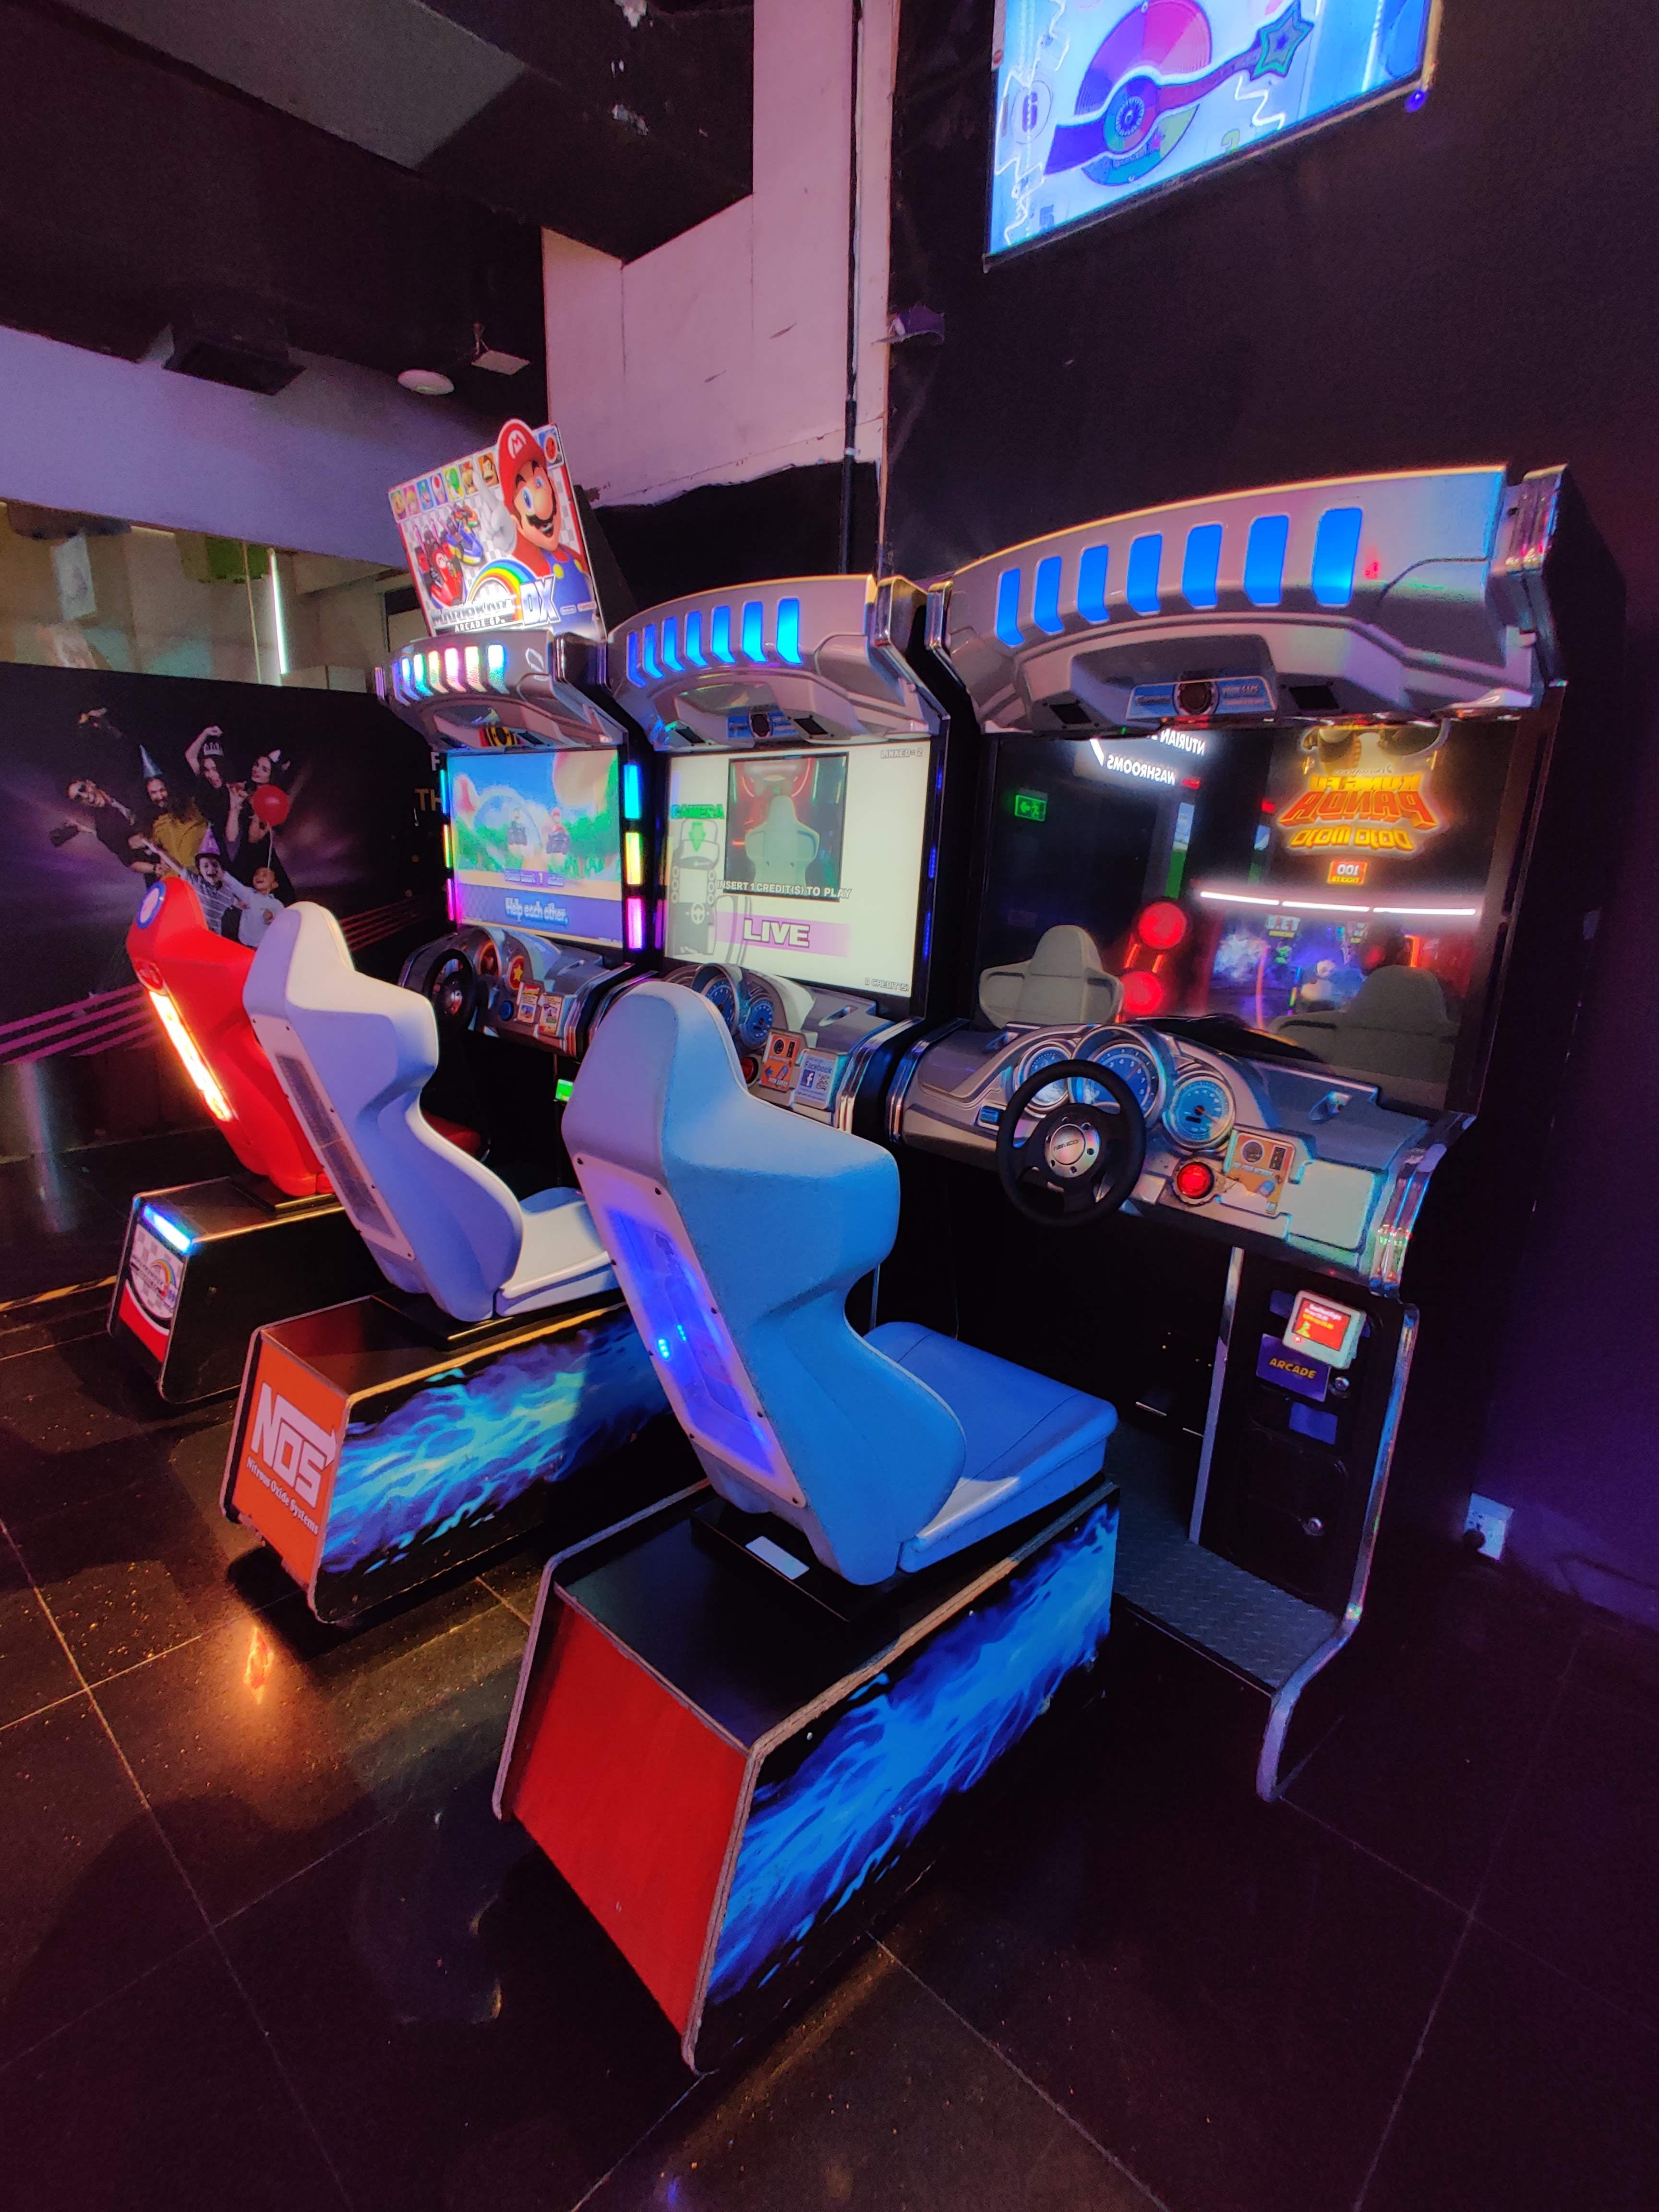 Games,Arcade game,Technology,Recreation,Recreation room,Electronic device,Visual effect lighting,Room,Video game arcade cabinet,Leisure